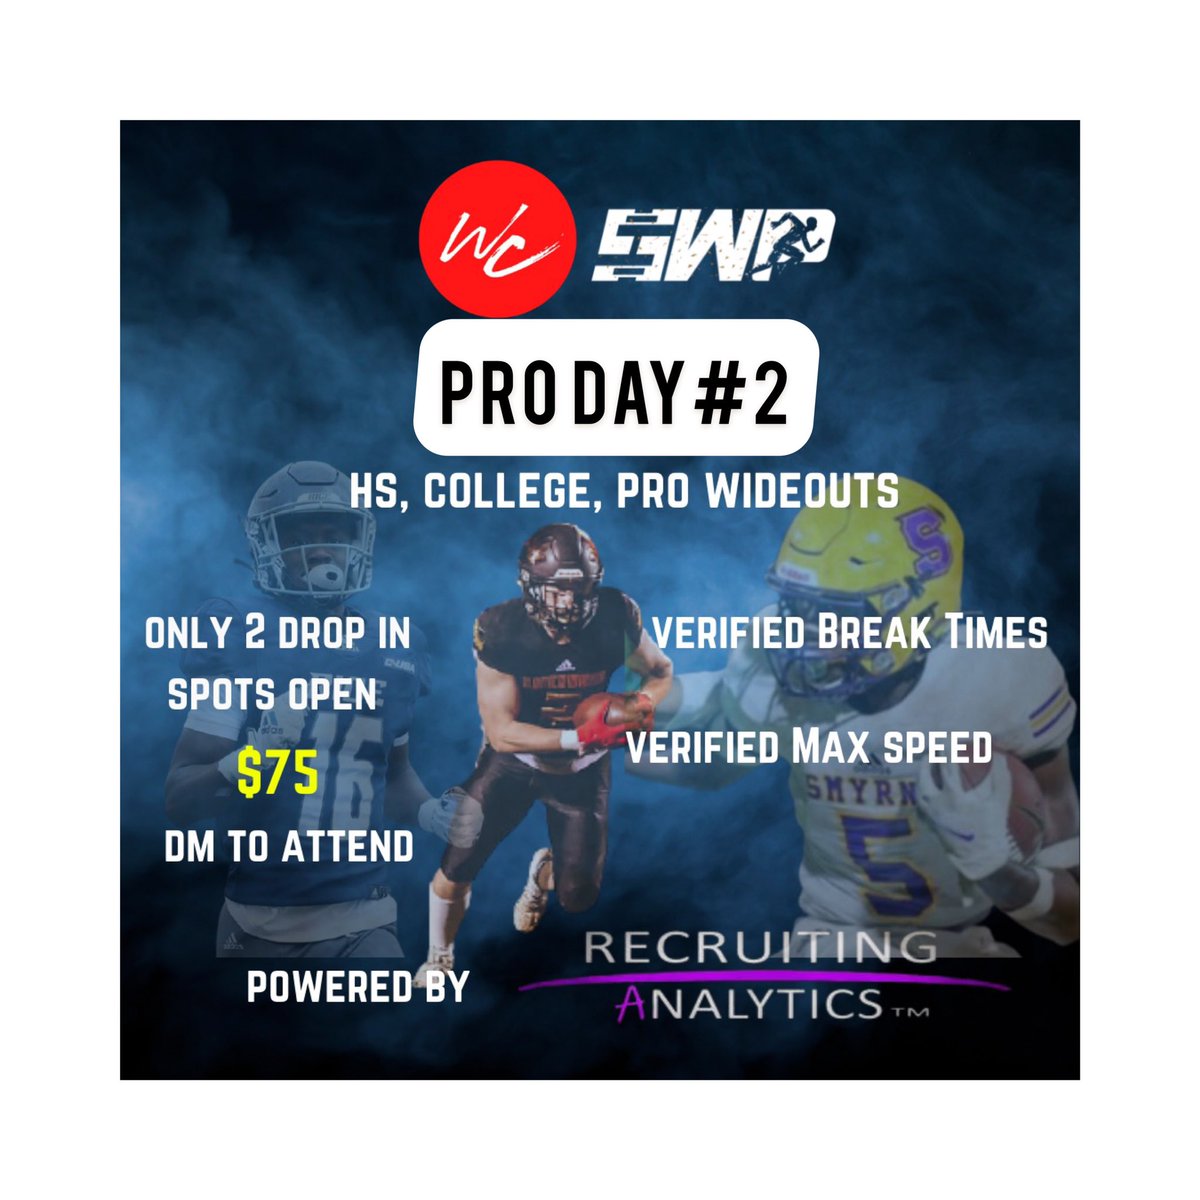 This Sunday!! June 20th Feel free to come join us for Pro Day #2 We got guys running over 20mph in the WideOut Summer Program! Contact me now🏁